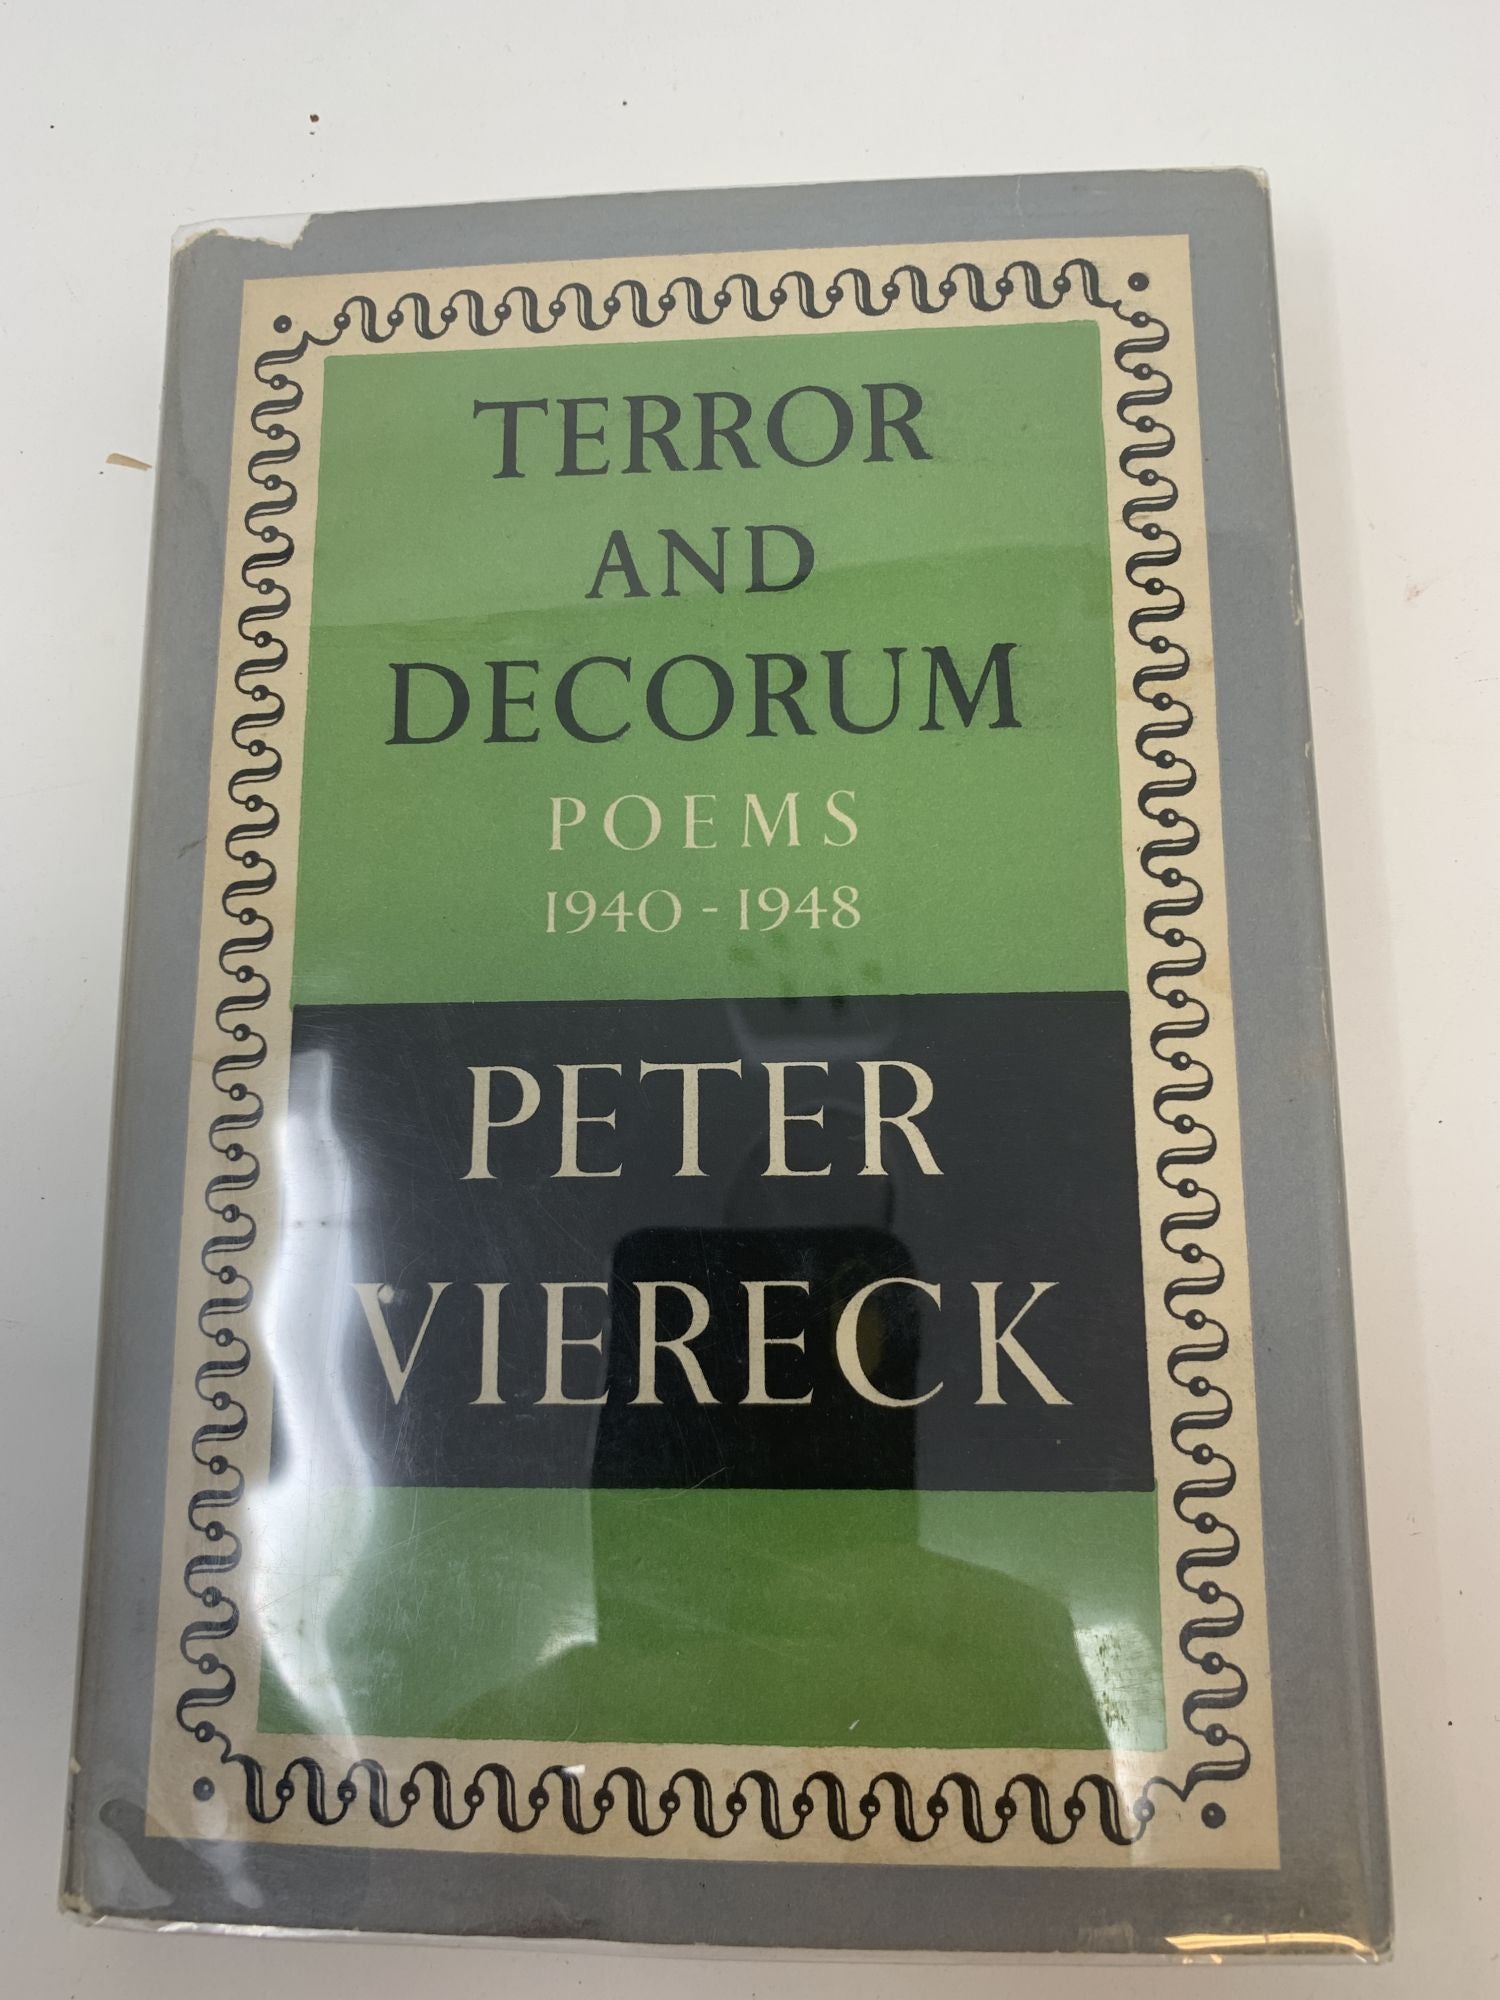 Viereck, Peter - Terror and Decorum : Poems 1940 - 1948 (with a Signed Letter, from the Poet, and Publisher's Yellow Printed Band, Laid in)